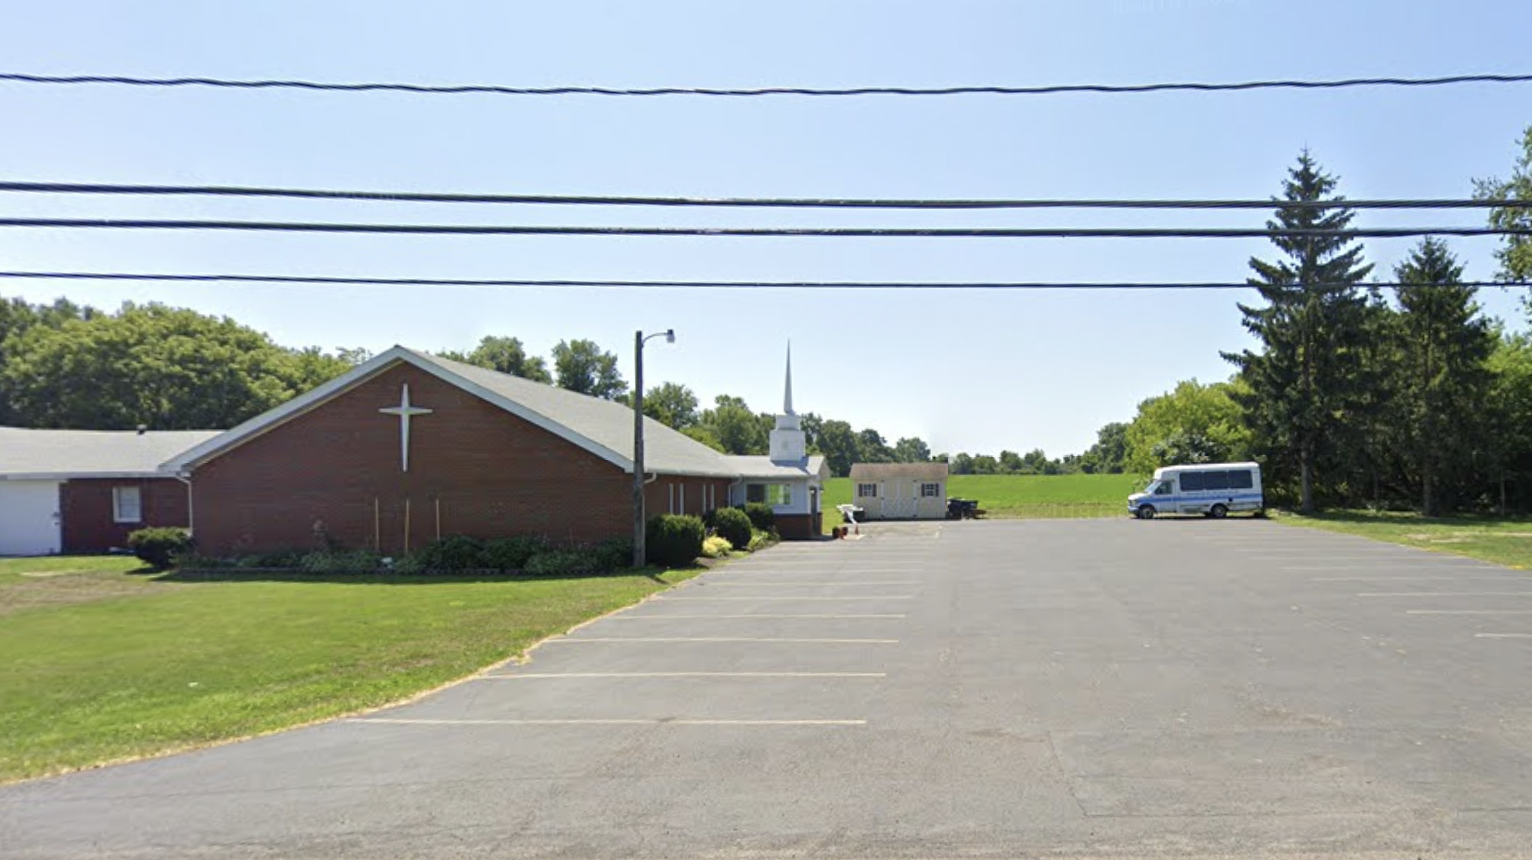 Landmark Free Will Baptist Church's parking lot and building